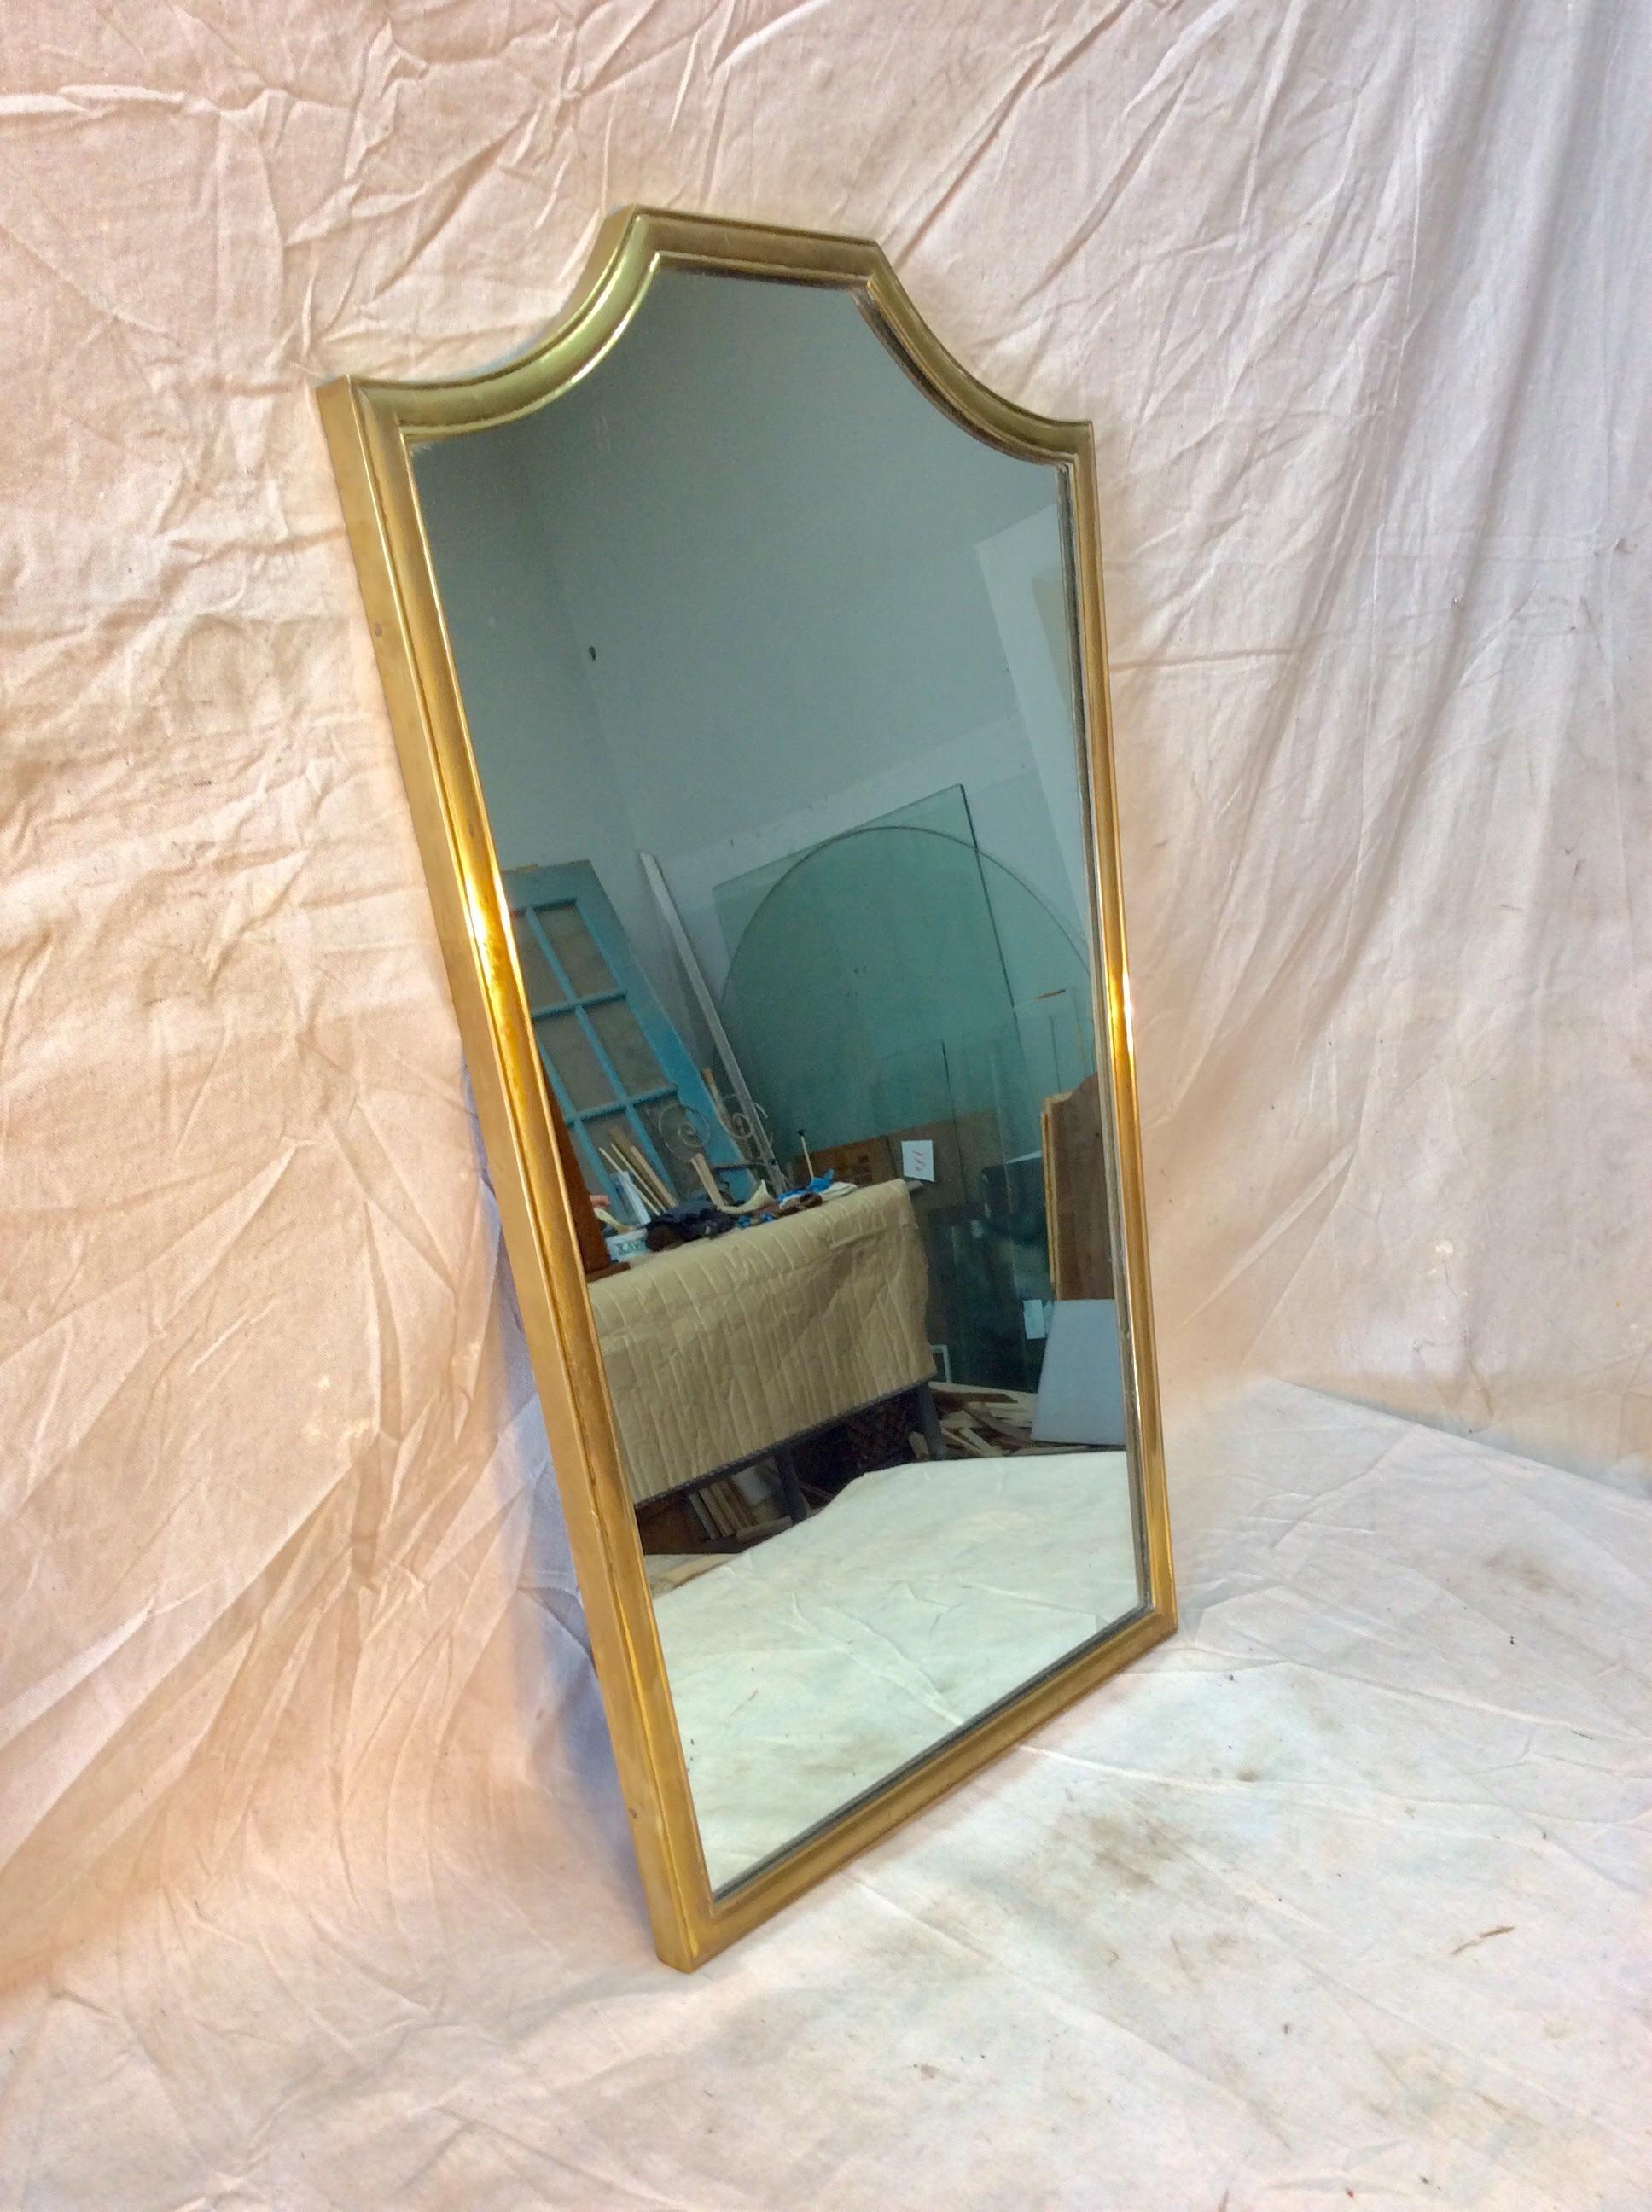 Found in Italy this Mid 20th Century Italian Brass Mirror features a rectangular shield shape with an aged brass surround. This simple and elegant vintage mirror has a lovely patina and is ready to hang.

20.5